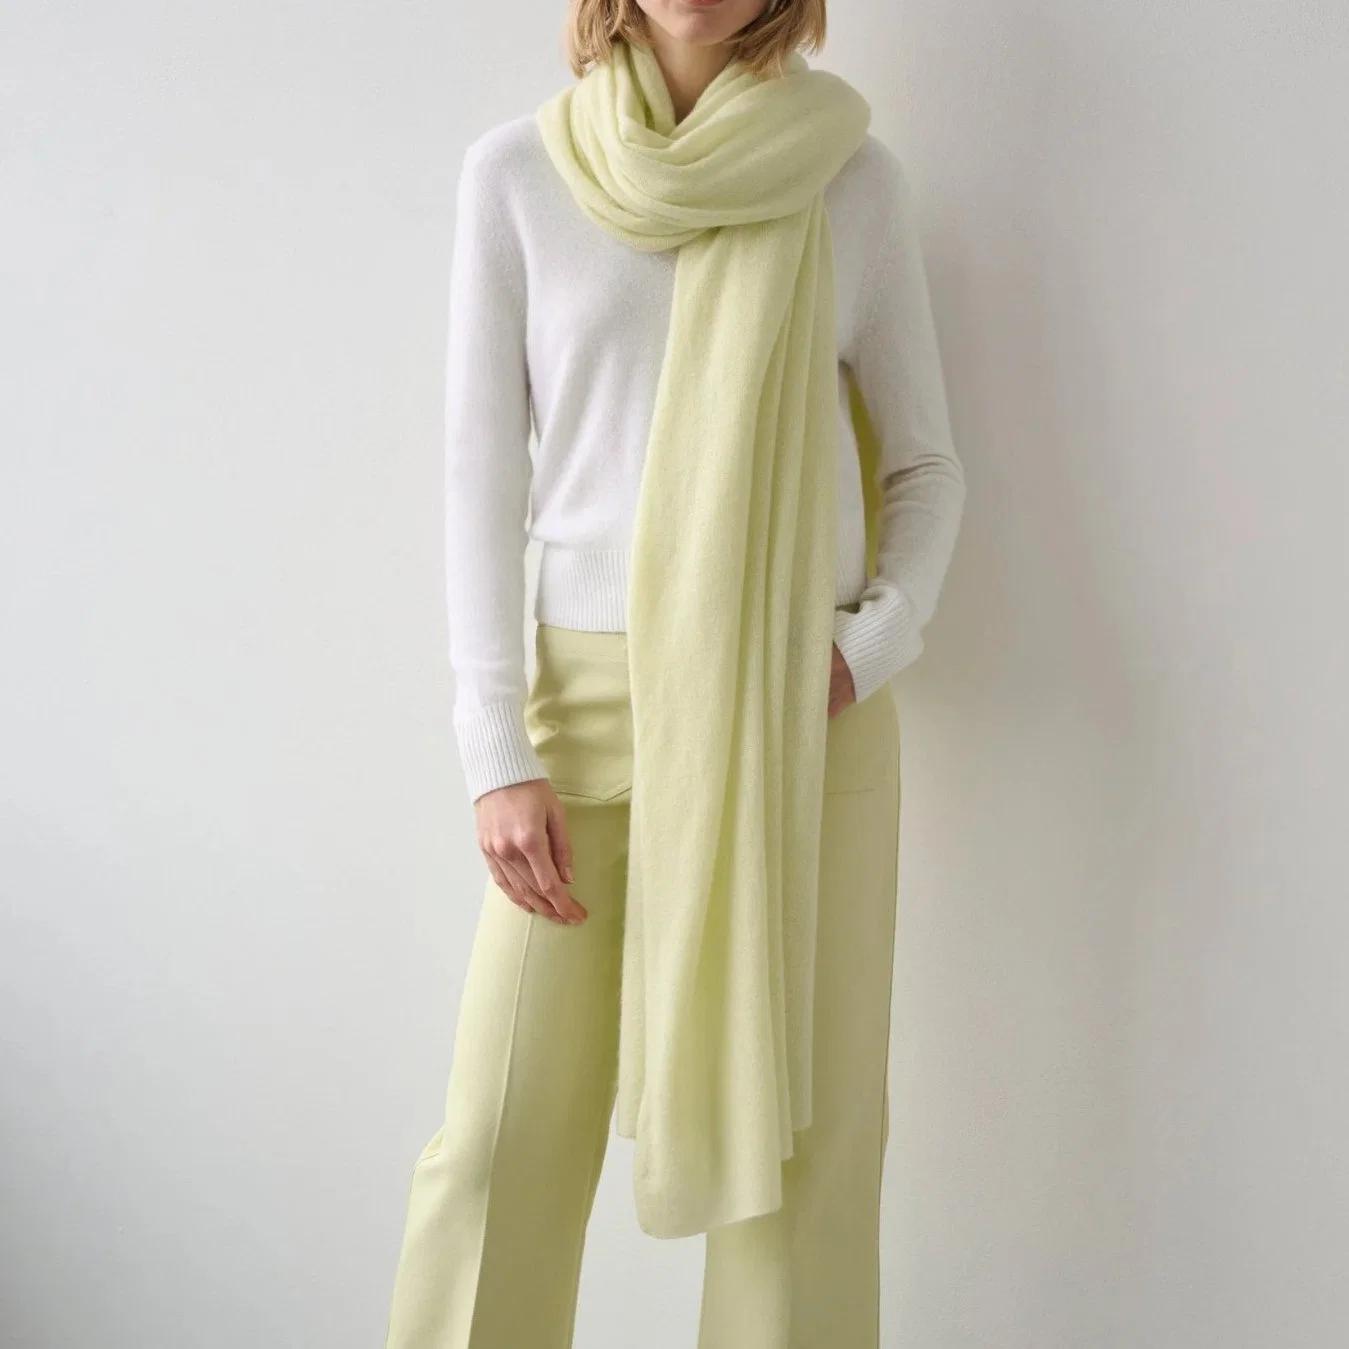 100% Cashmere Soft Daisy Coloured Men and Ladies -2 Ply Woven Warp Apparel Accessories